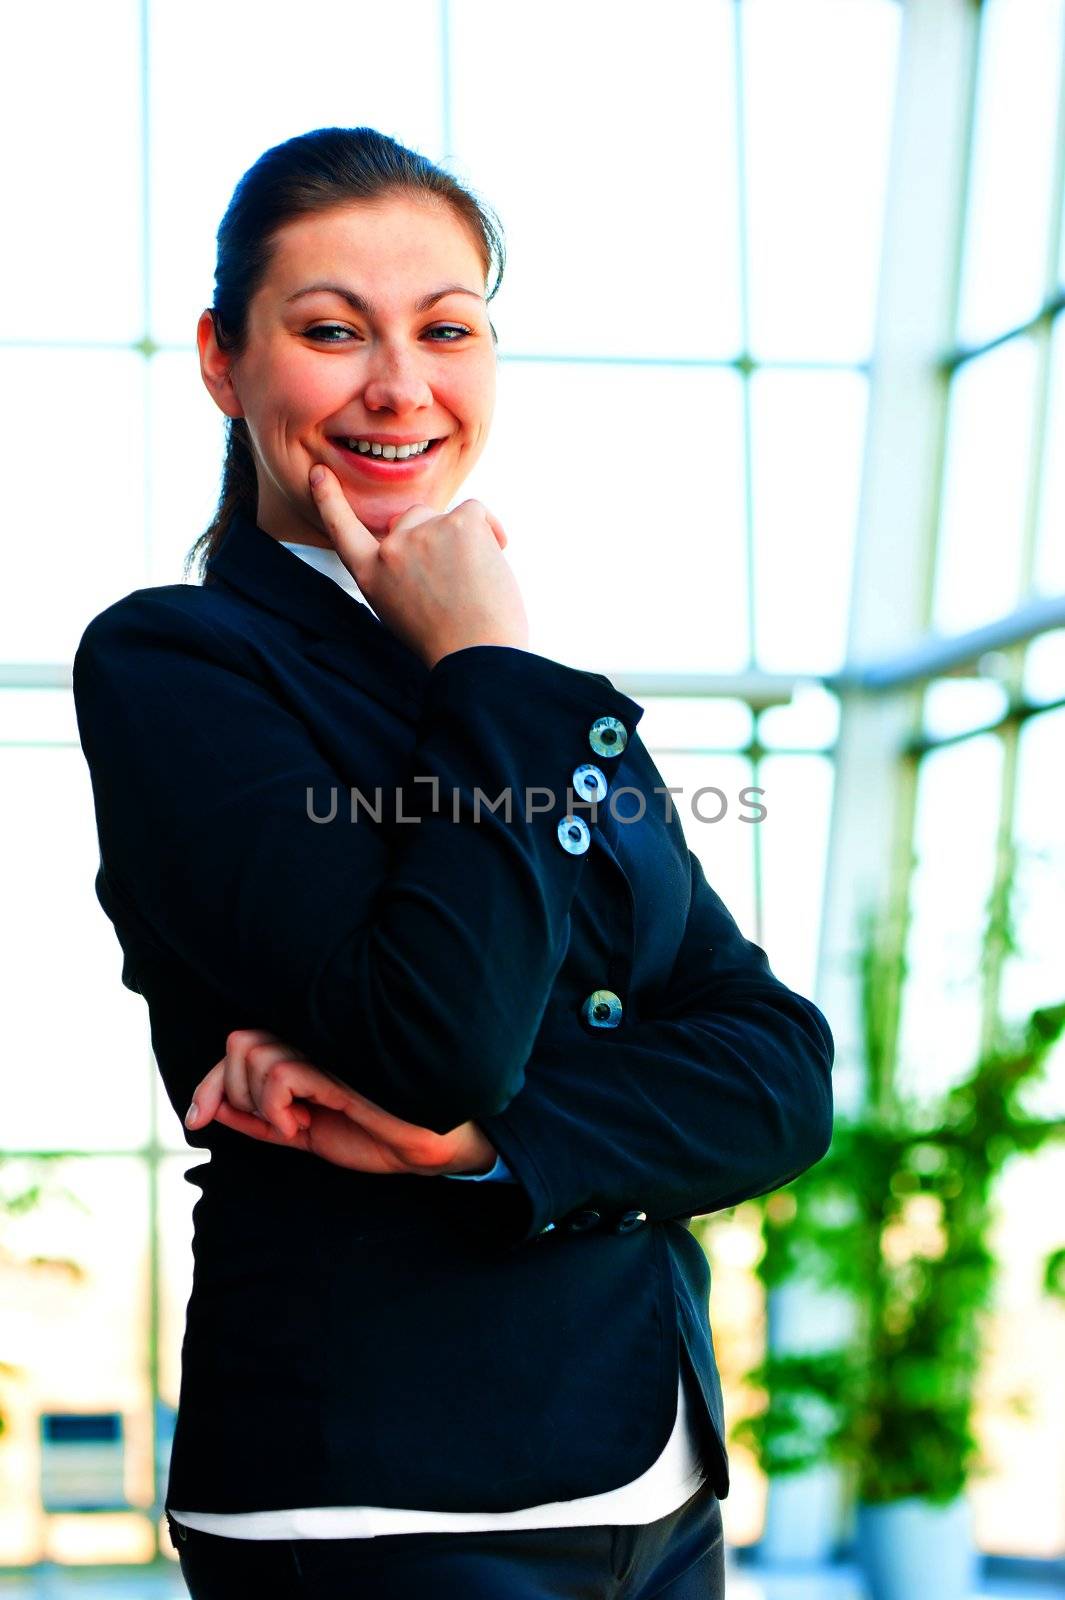 Portrait of smiling successful business people on the background of a blurred office interior by kosmsos111